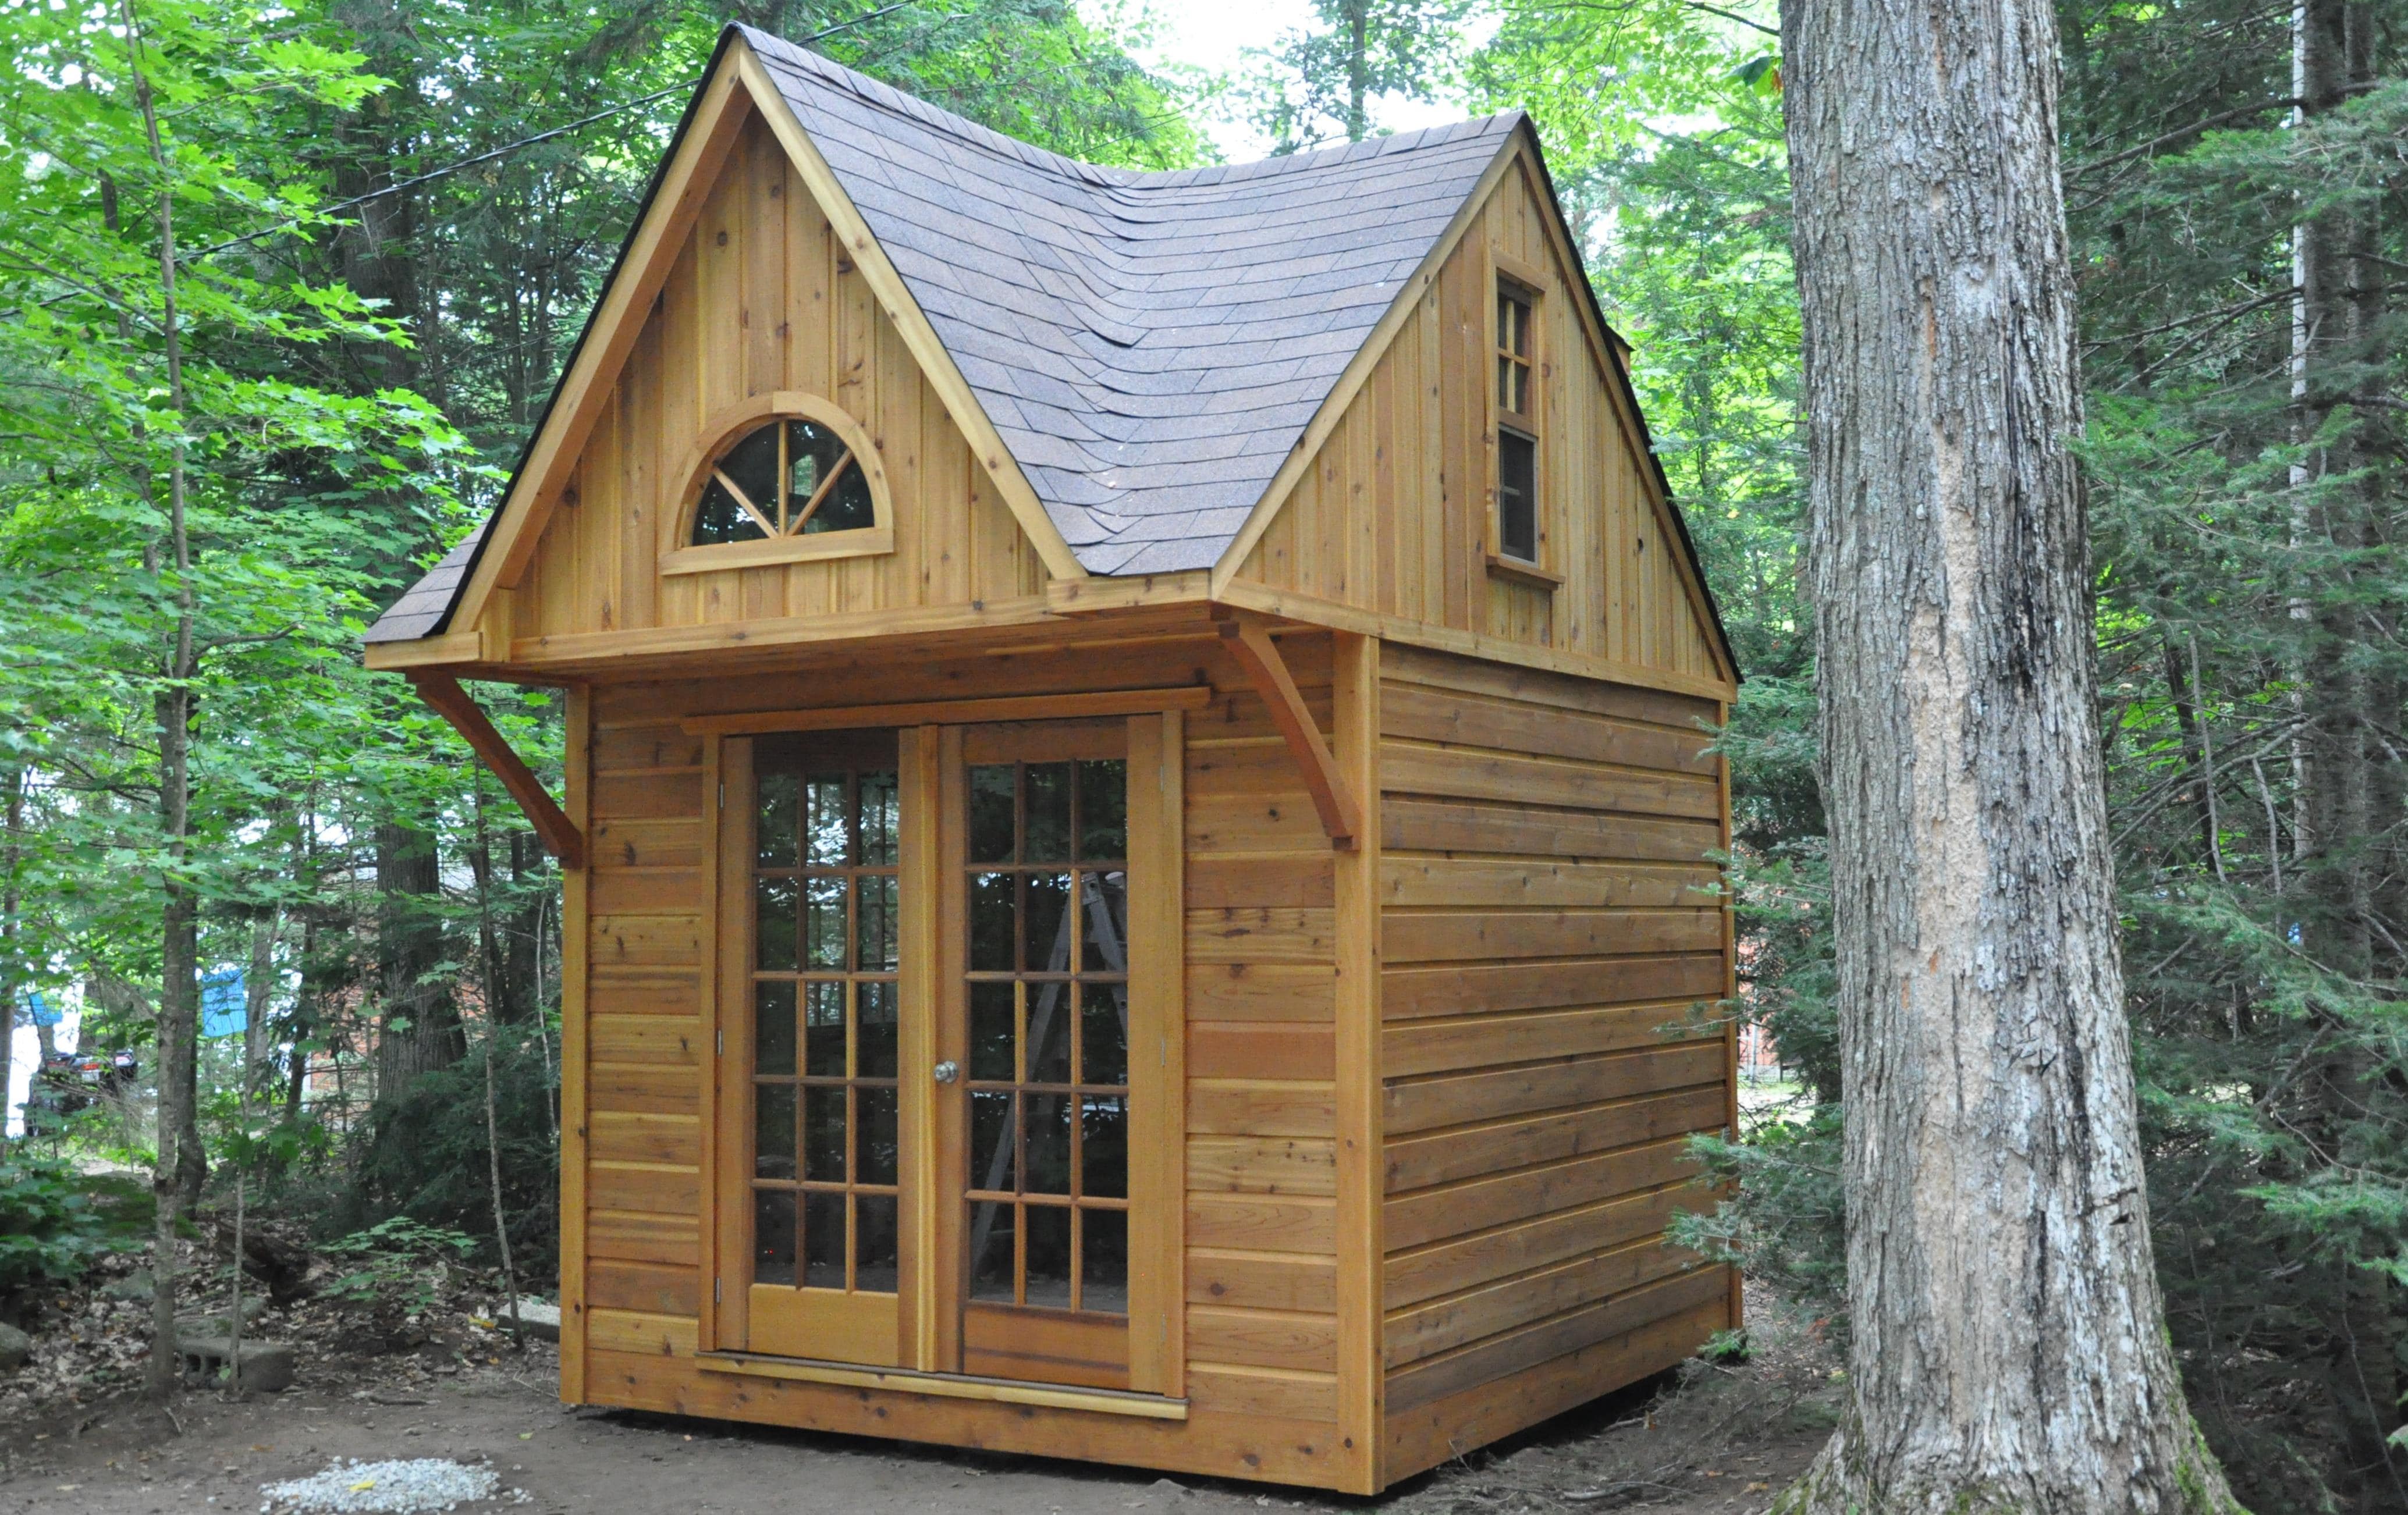  Bala bunkie 10 x 10 with french doors in Wood Lake Ontario. ID number 180626-2